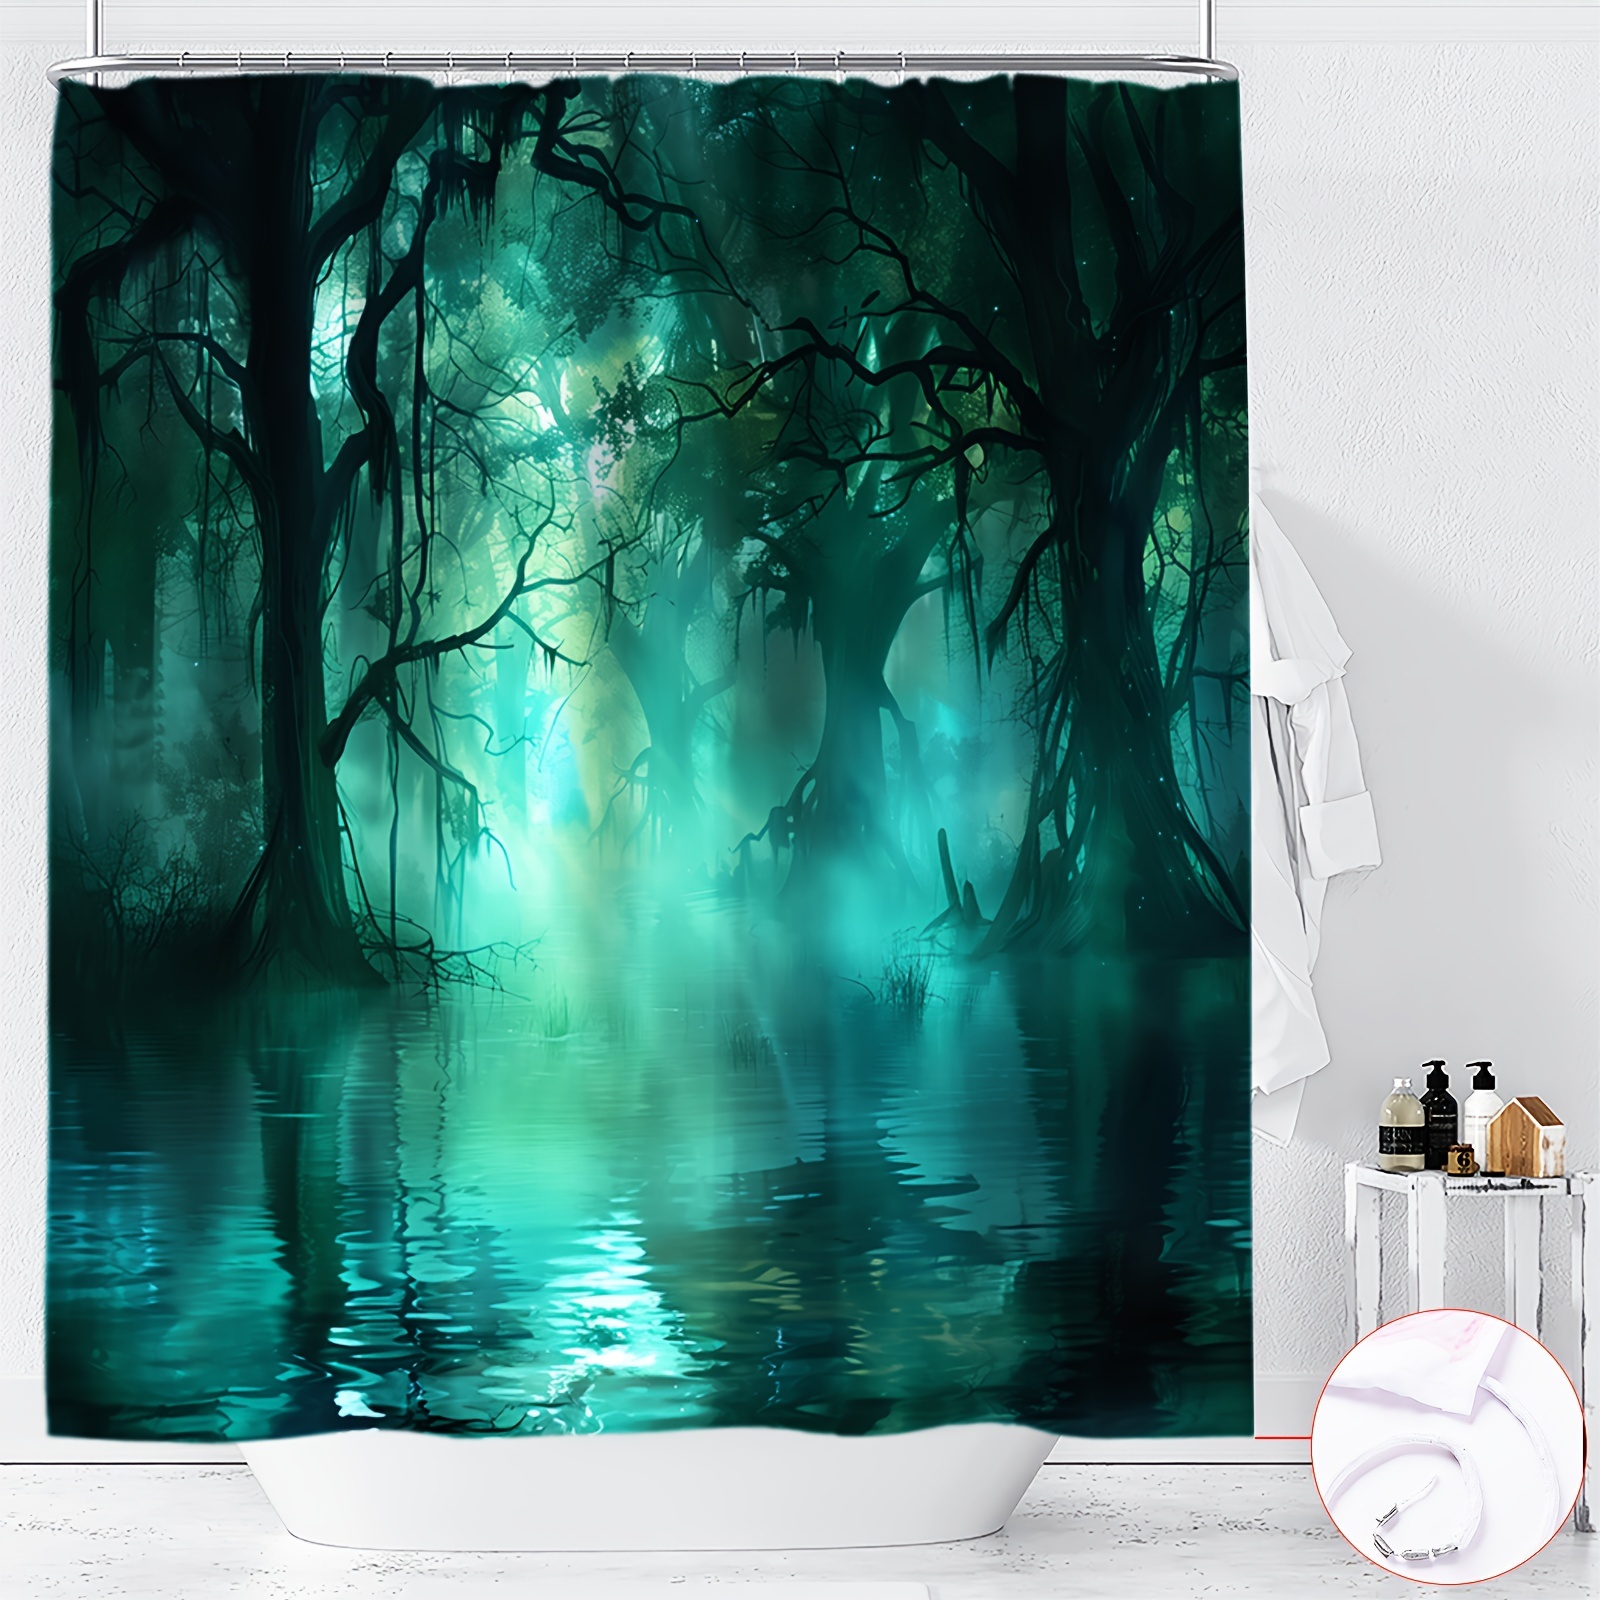 

Mystical Swamp Forest Print Shower Curtain, Ywjhui Water-resistant Polyester Bathroom Decor With Hooks, Machine Washable, Woven Knit Weave, Woodland Theme For All Seasons